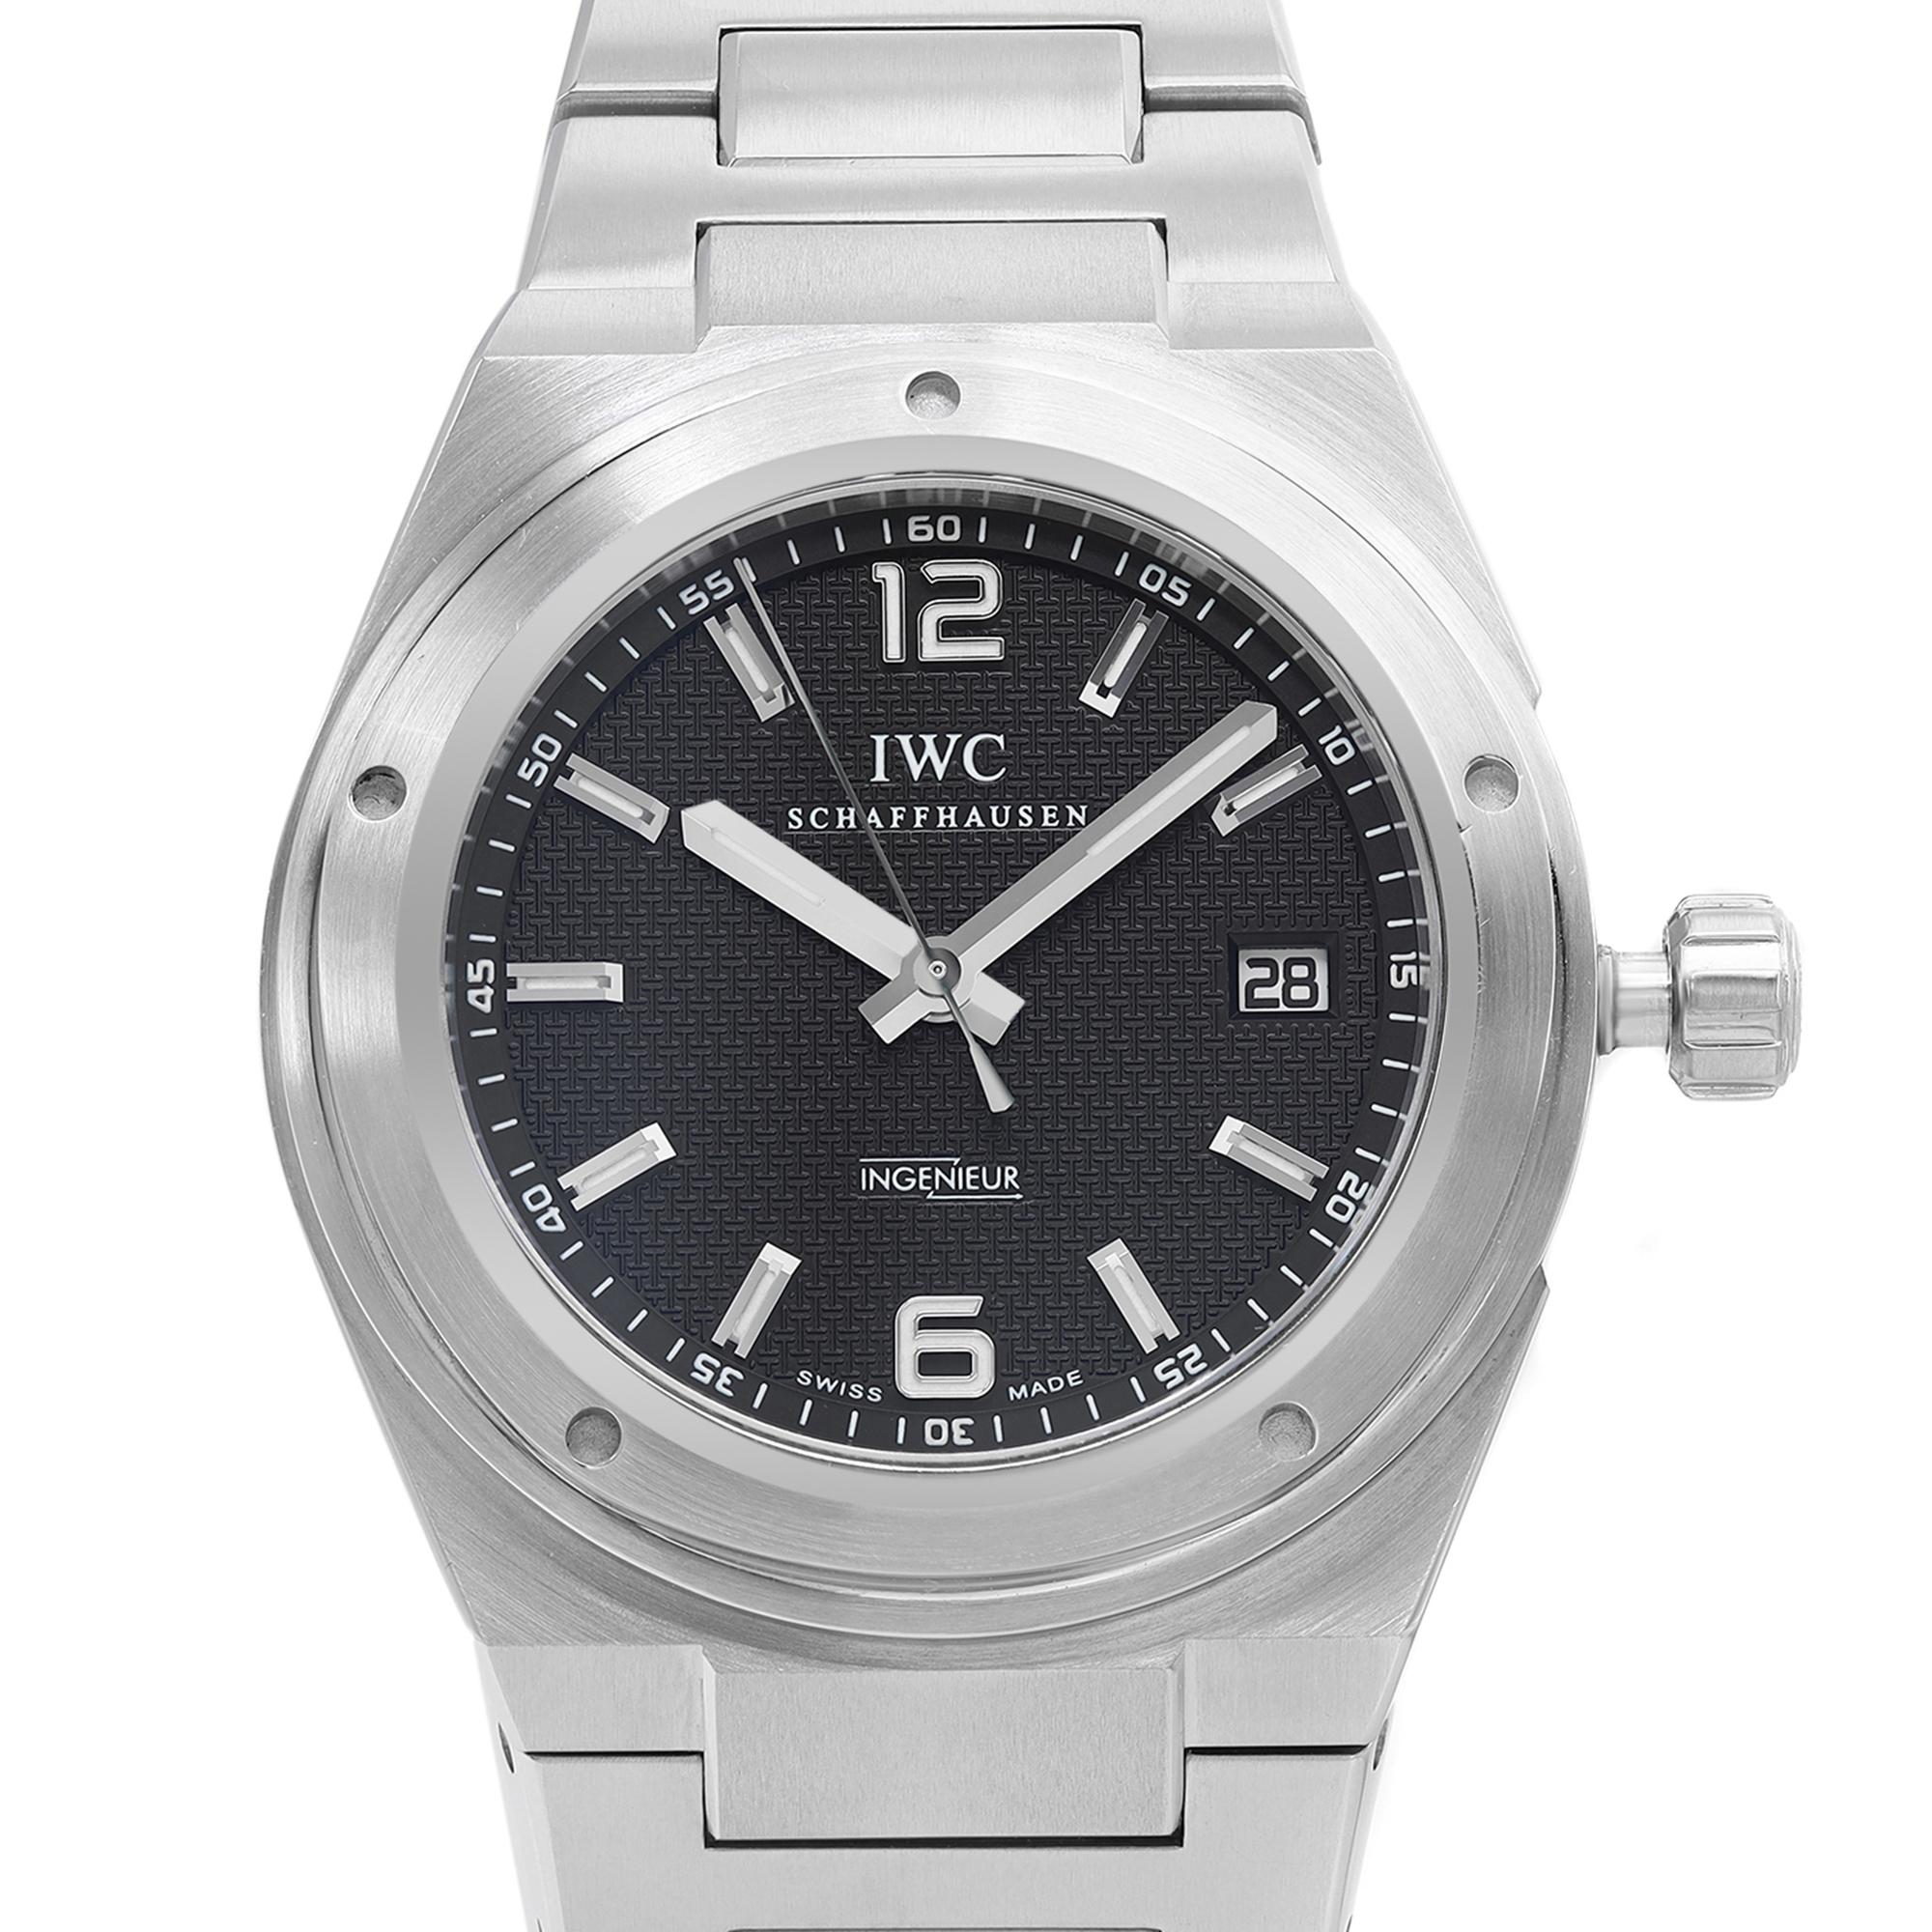 Pre-Owned IWC Schaffhausen Ingenieur Black Dial Automatic Mens Watch IW322701. No Original Box and Papers are Included. Comes with Chronostore Presentation Box and Chronostore Authenticity Card. Covered by a 2-year Chronostore Warranty.

Brand: IWC 